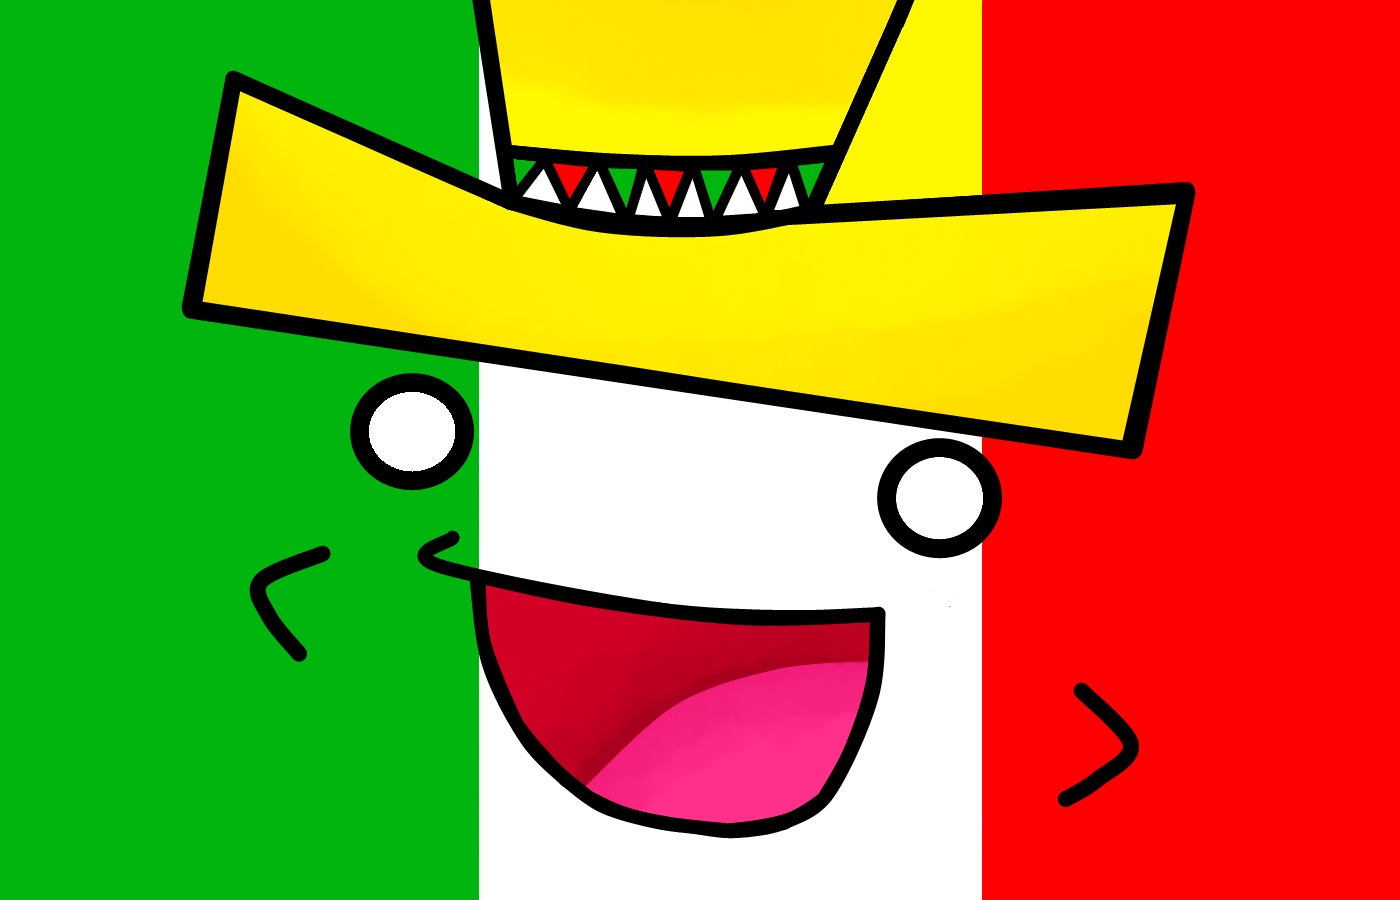 deviantART: More Like Mexican Smiley Face by YuiRainbowStar